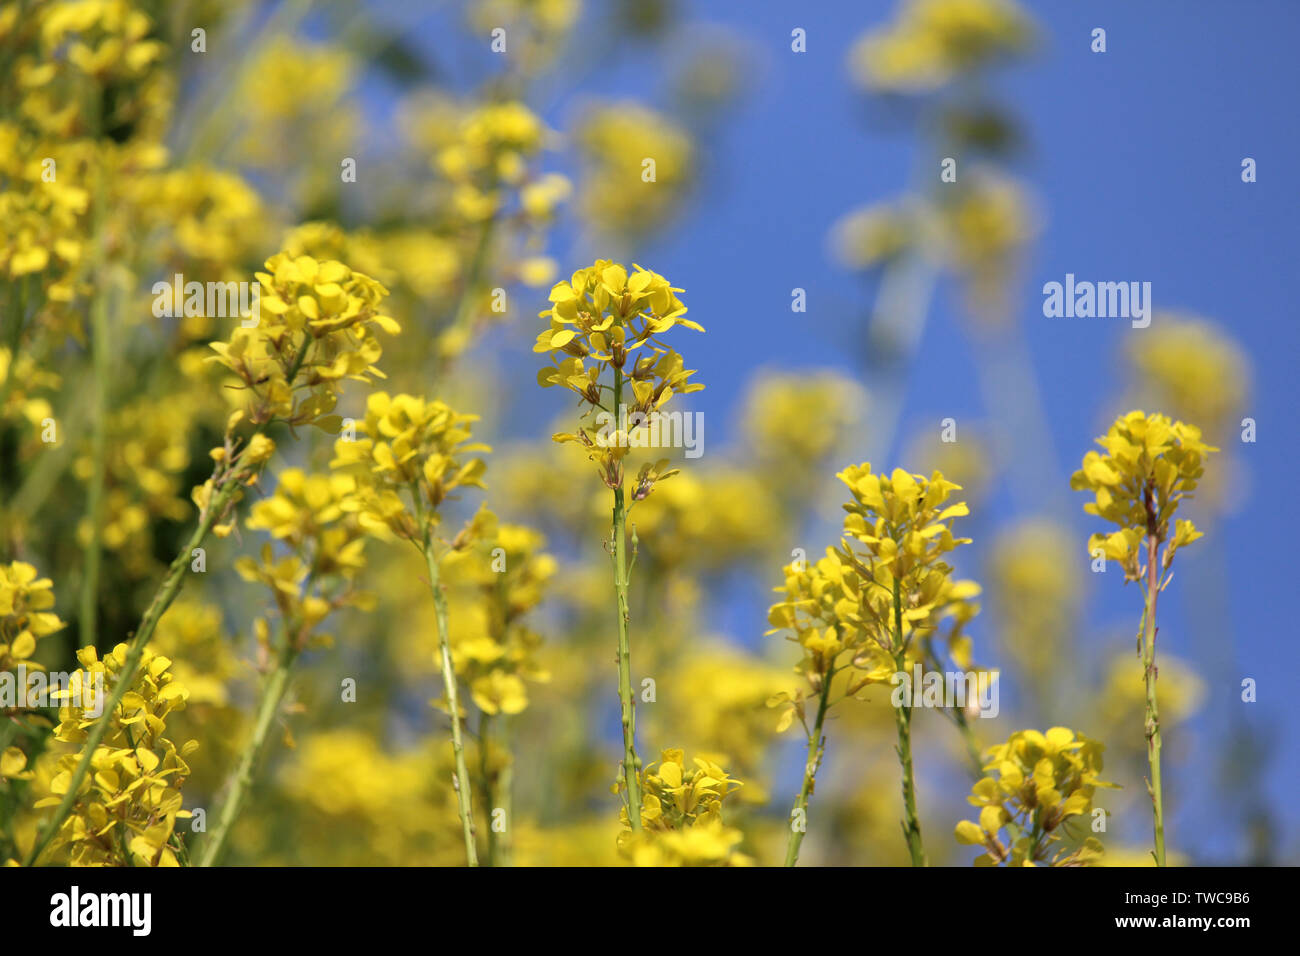 The bright yellow flowers of Field mustard also known as Brassica rapa subsp. oleifera against a background of blue sky. Stock Photo